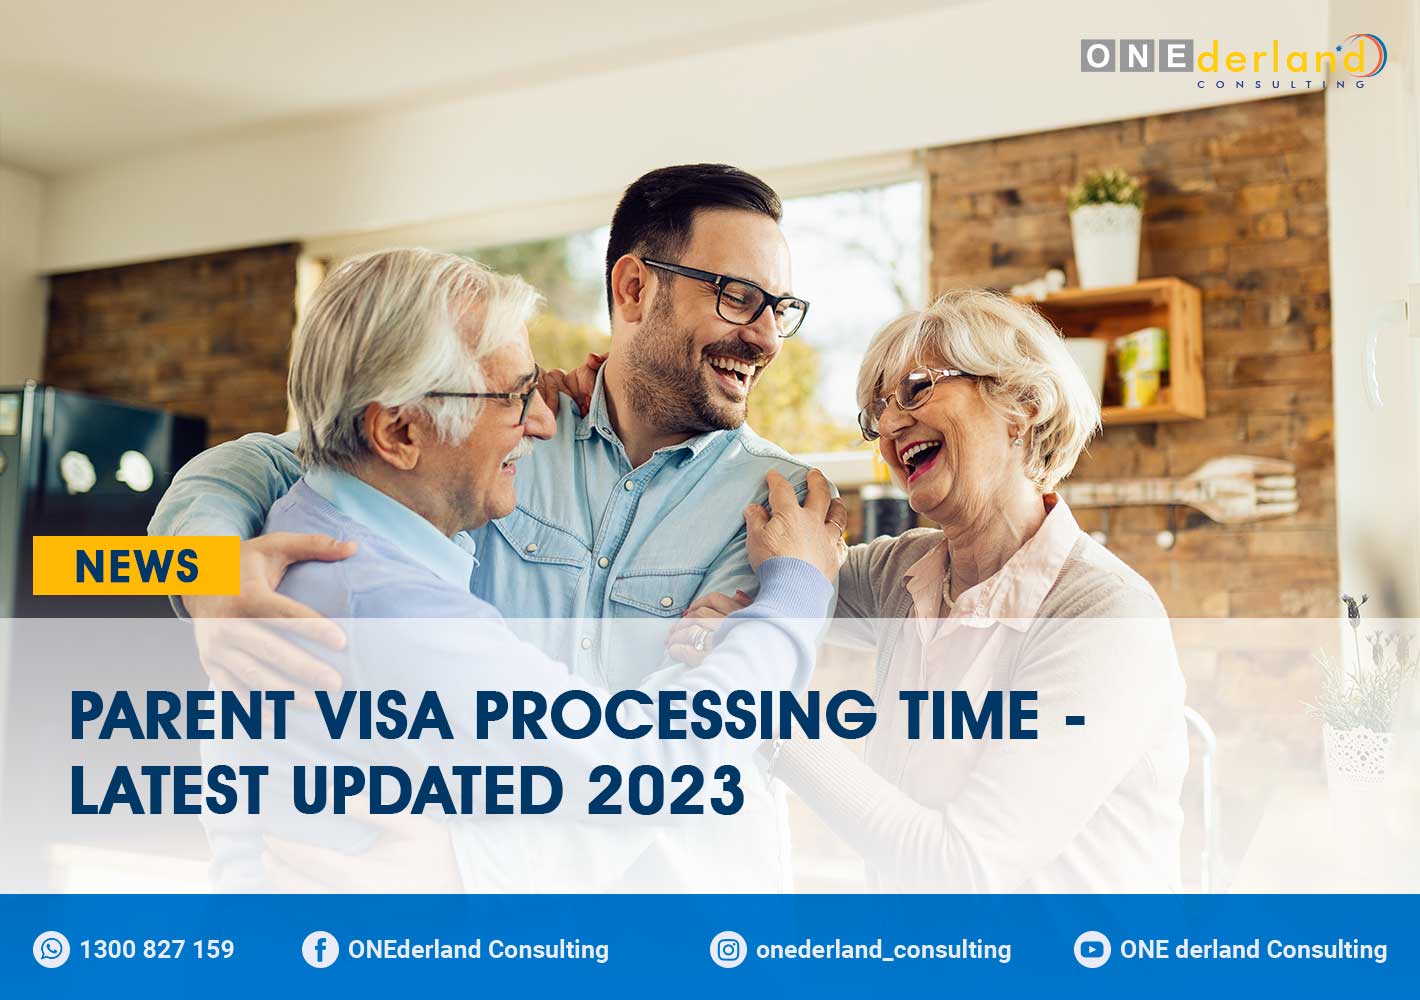 Parent Visa Processing Time - Latest Updated 2023